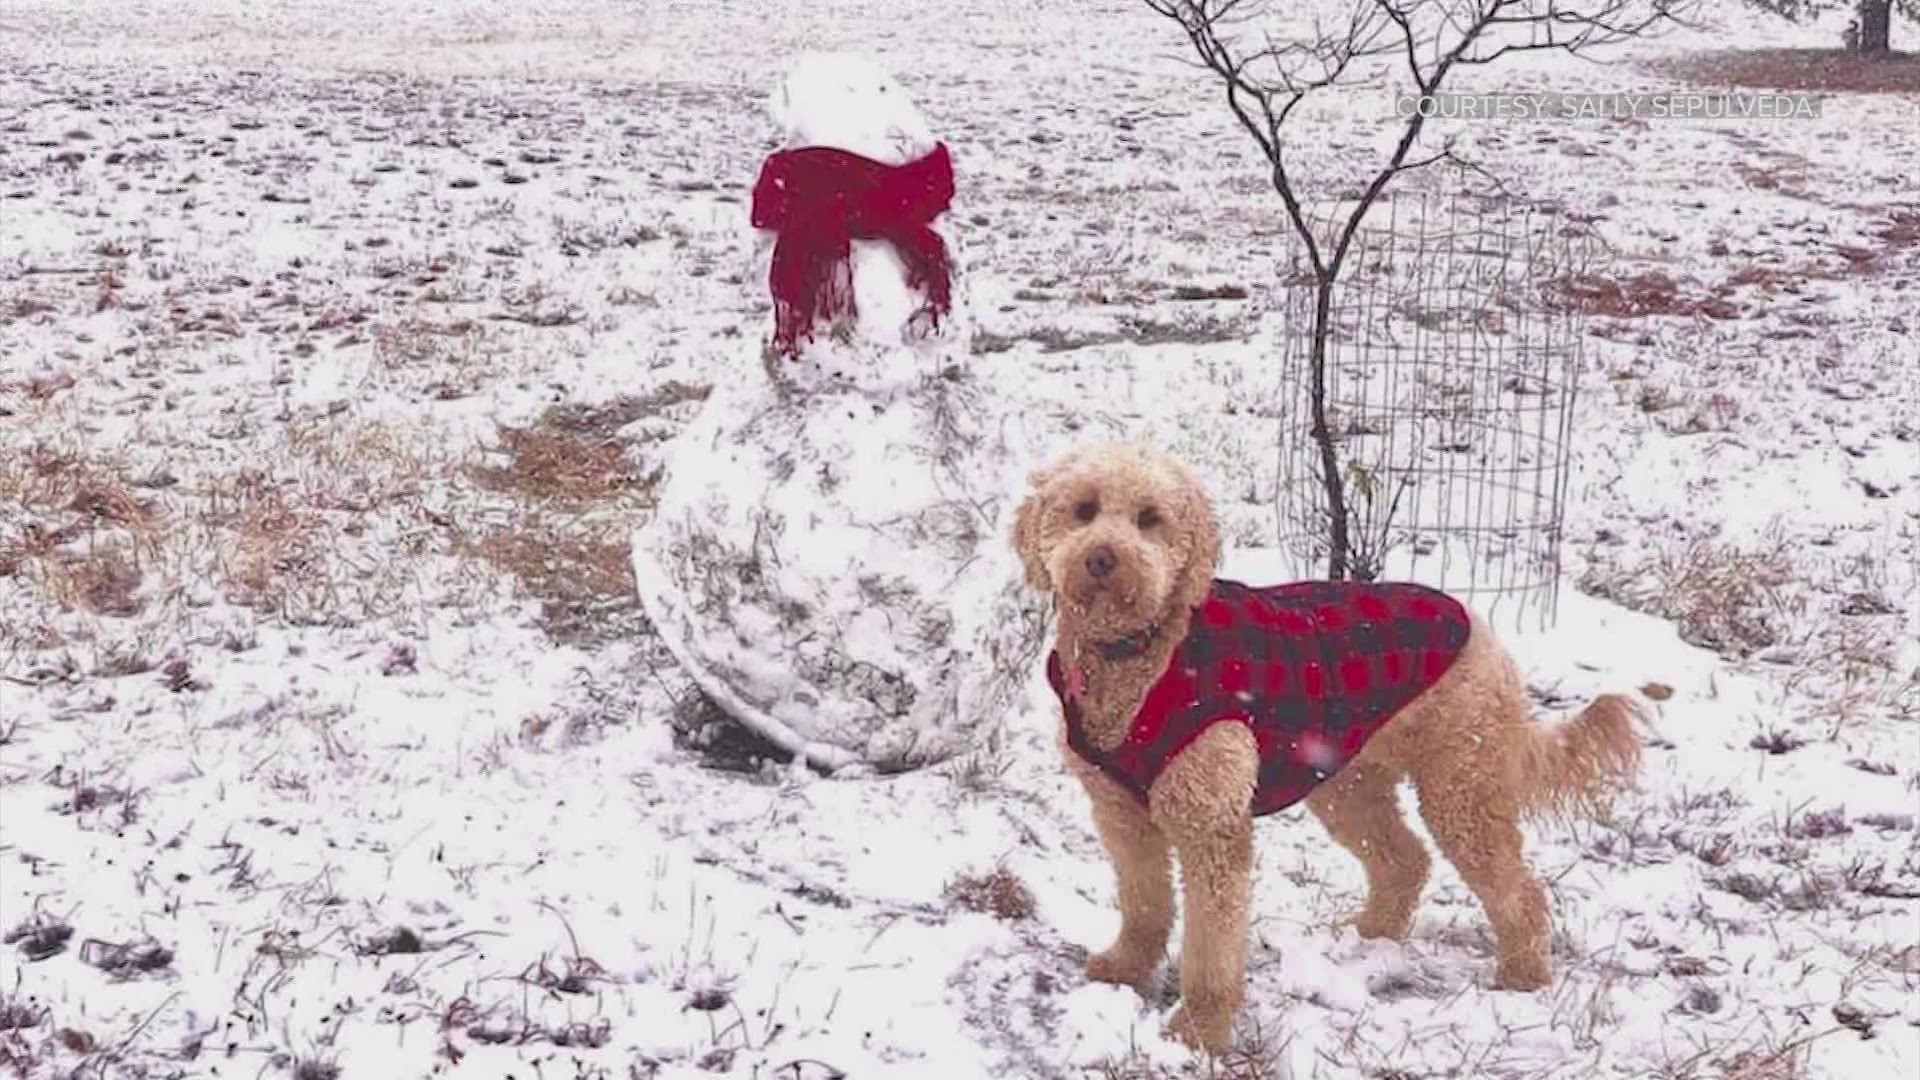 This is Buttercup, who spent all day playing in the snow in Round Mountain, Texas with owner Sally Sepulveda.